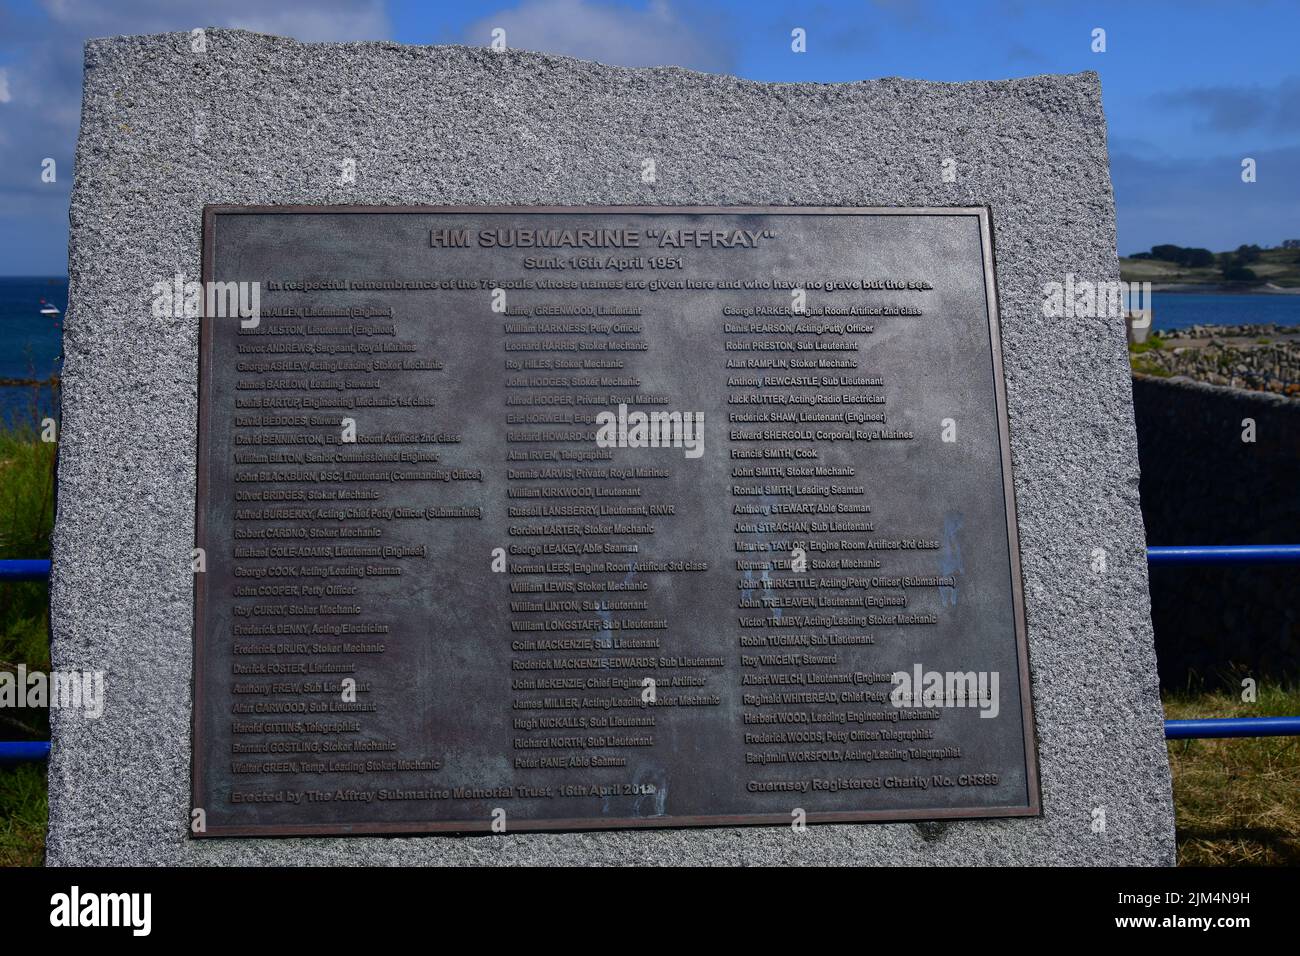 Memorial to those who persihed in HMS Affray on April 16th 1951, situated in Braye Harbour,, Alderney, Channel Islands, Great Britain, June 2022. Stock Photo